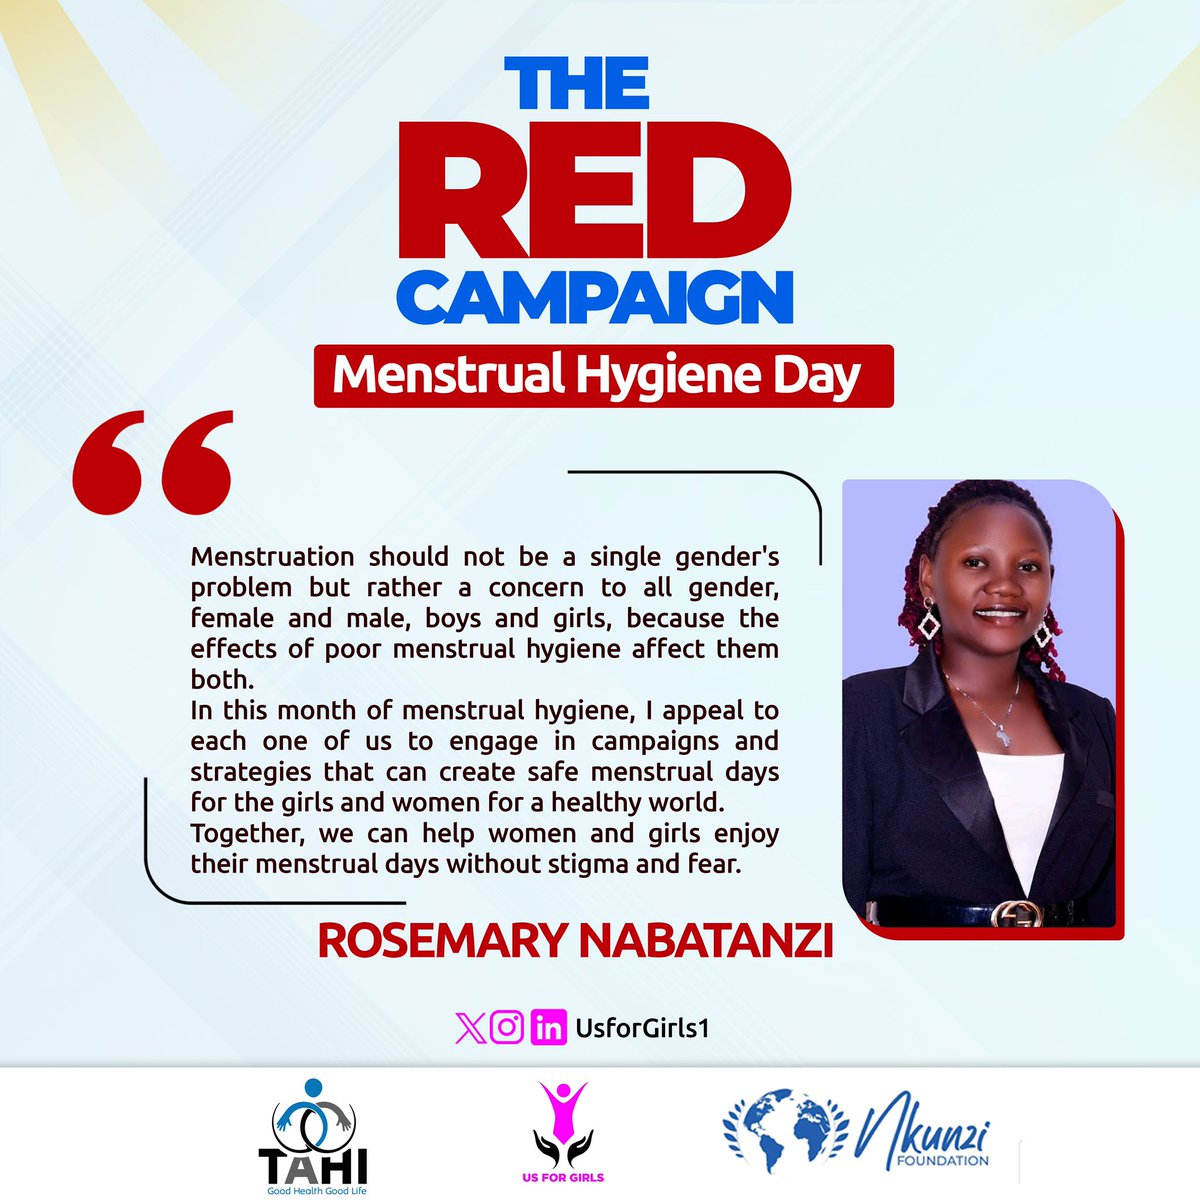 @NabatanziRose1 highlights that Menstruation should not be a single gender's problem but rather a concern to all gender, female and male, boys and girls. #RedCampaign #EndPeriodPoverty